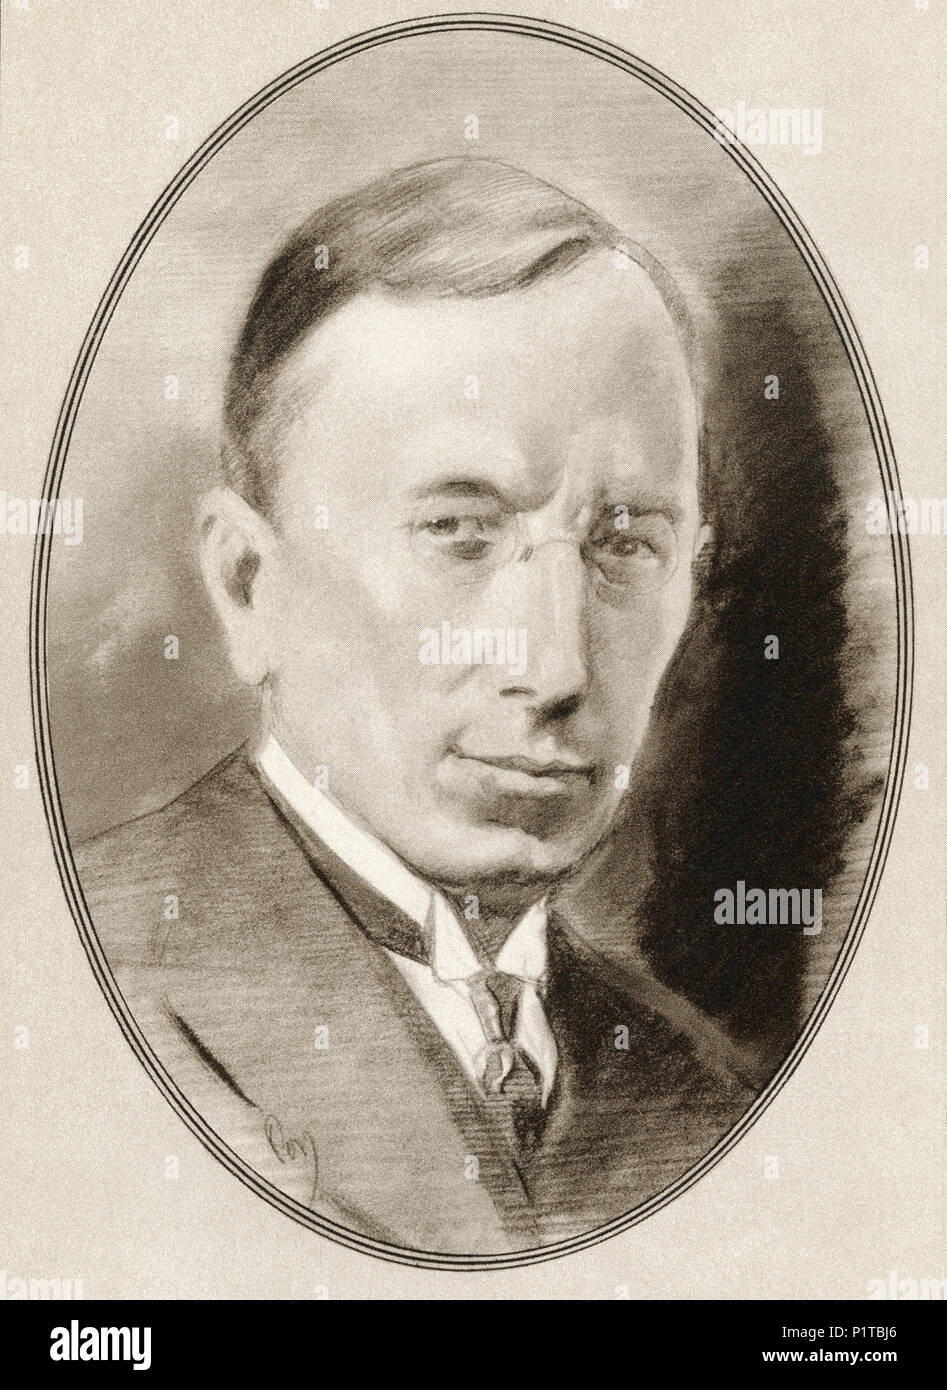 Sir Frederick Grant Banting, 1891 – 1941. Canadian medical scientist, physician, painter, and Nobel laureate noted as the co-discoverer of insulin.  Illustration by Gordon Ross, American artist and illustrator (1873-1946), from Living Biographies of Great Scientists. Stock Photo